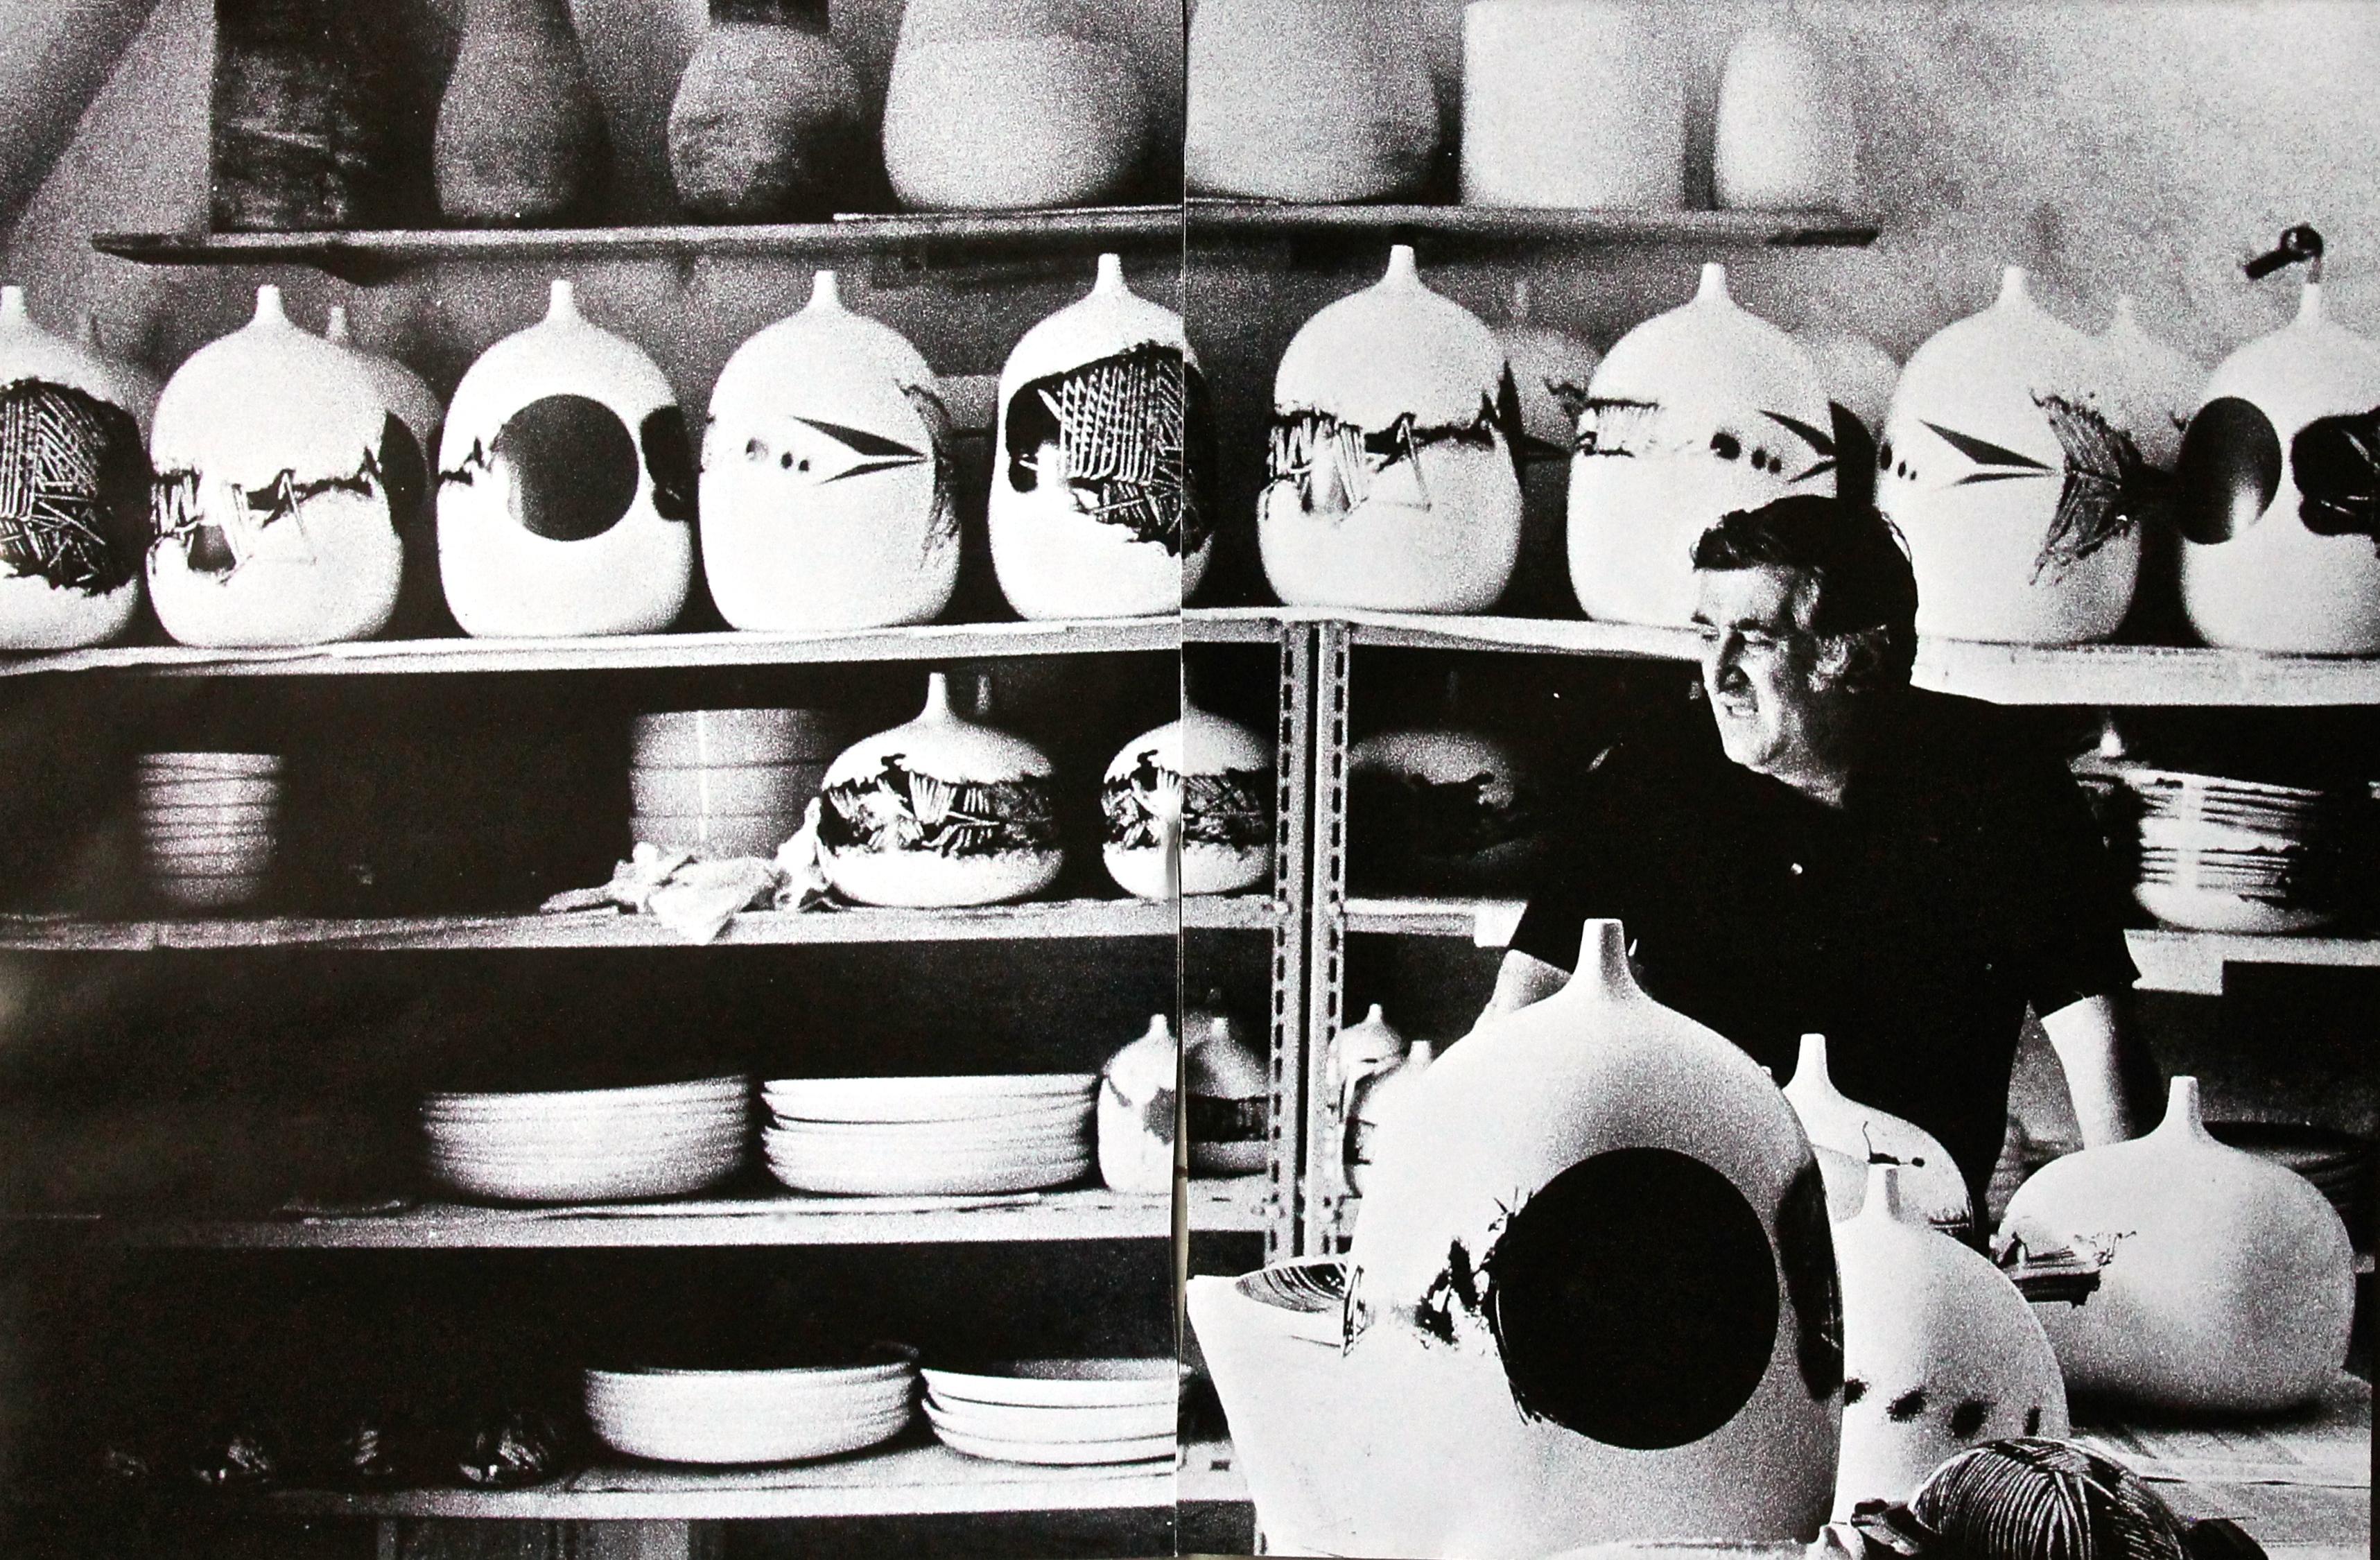 Hand-painted and thrown ceramic by this important Italian Abstract Expressionist artist.